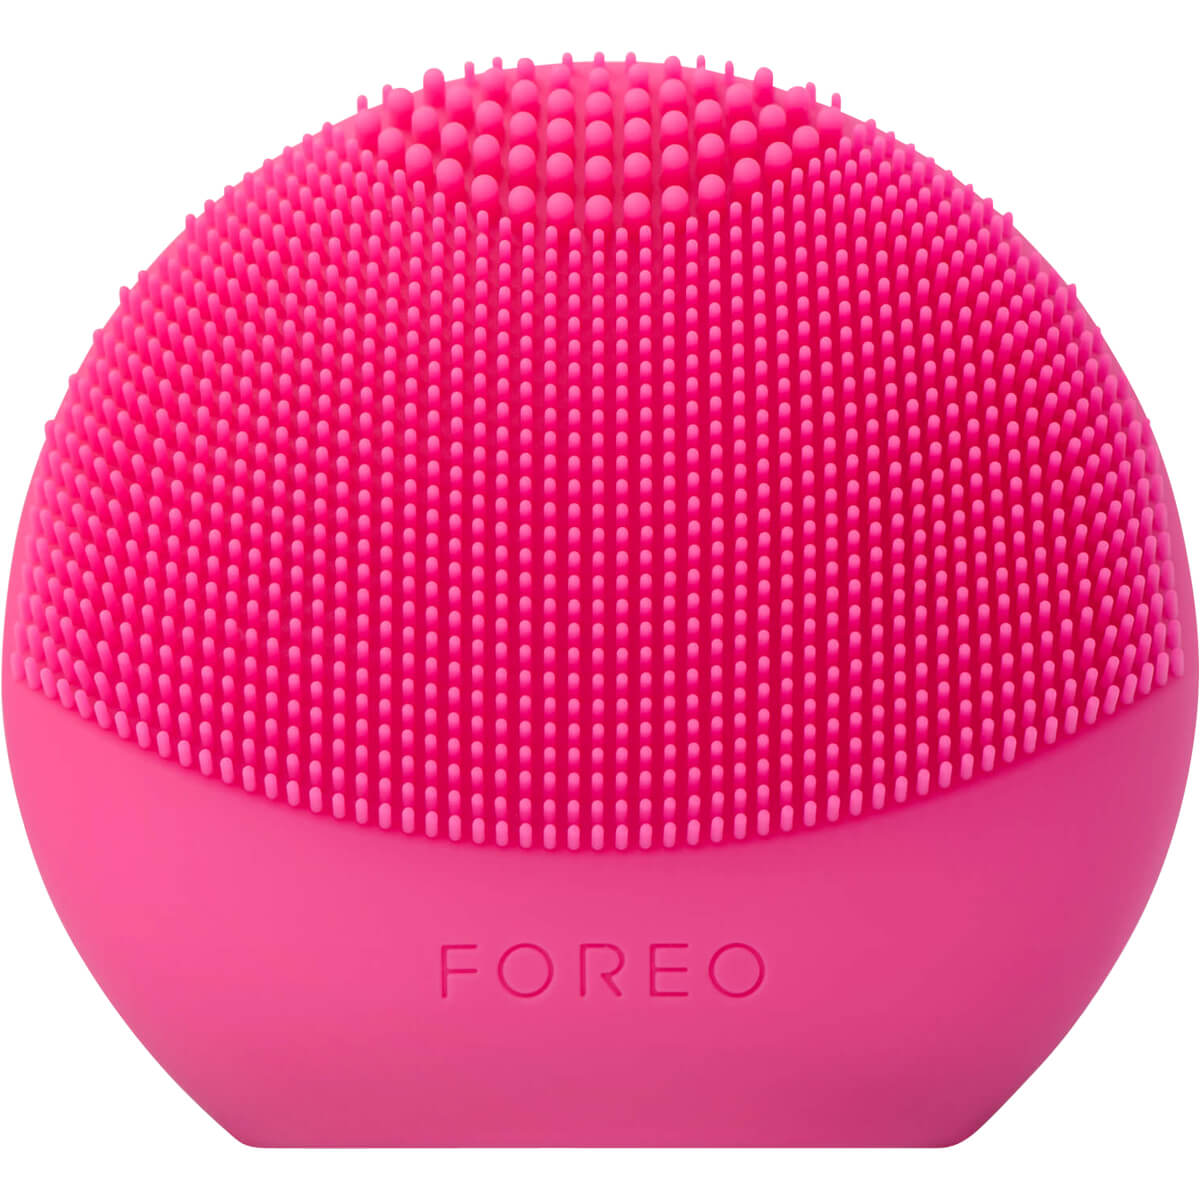 FOREO PEACH 2 Advanced IPL Hair Removal Device | CurrentBody US